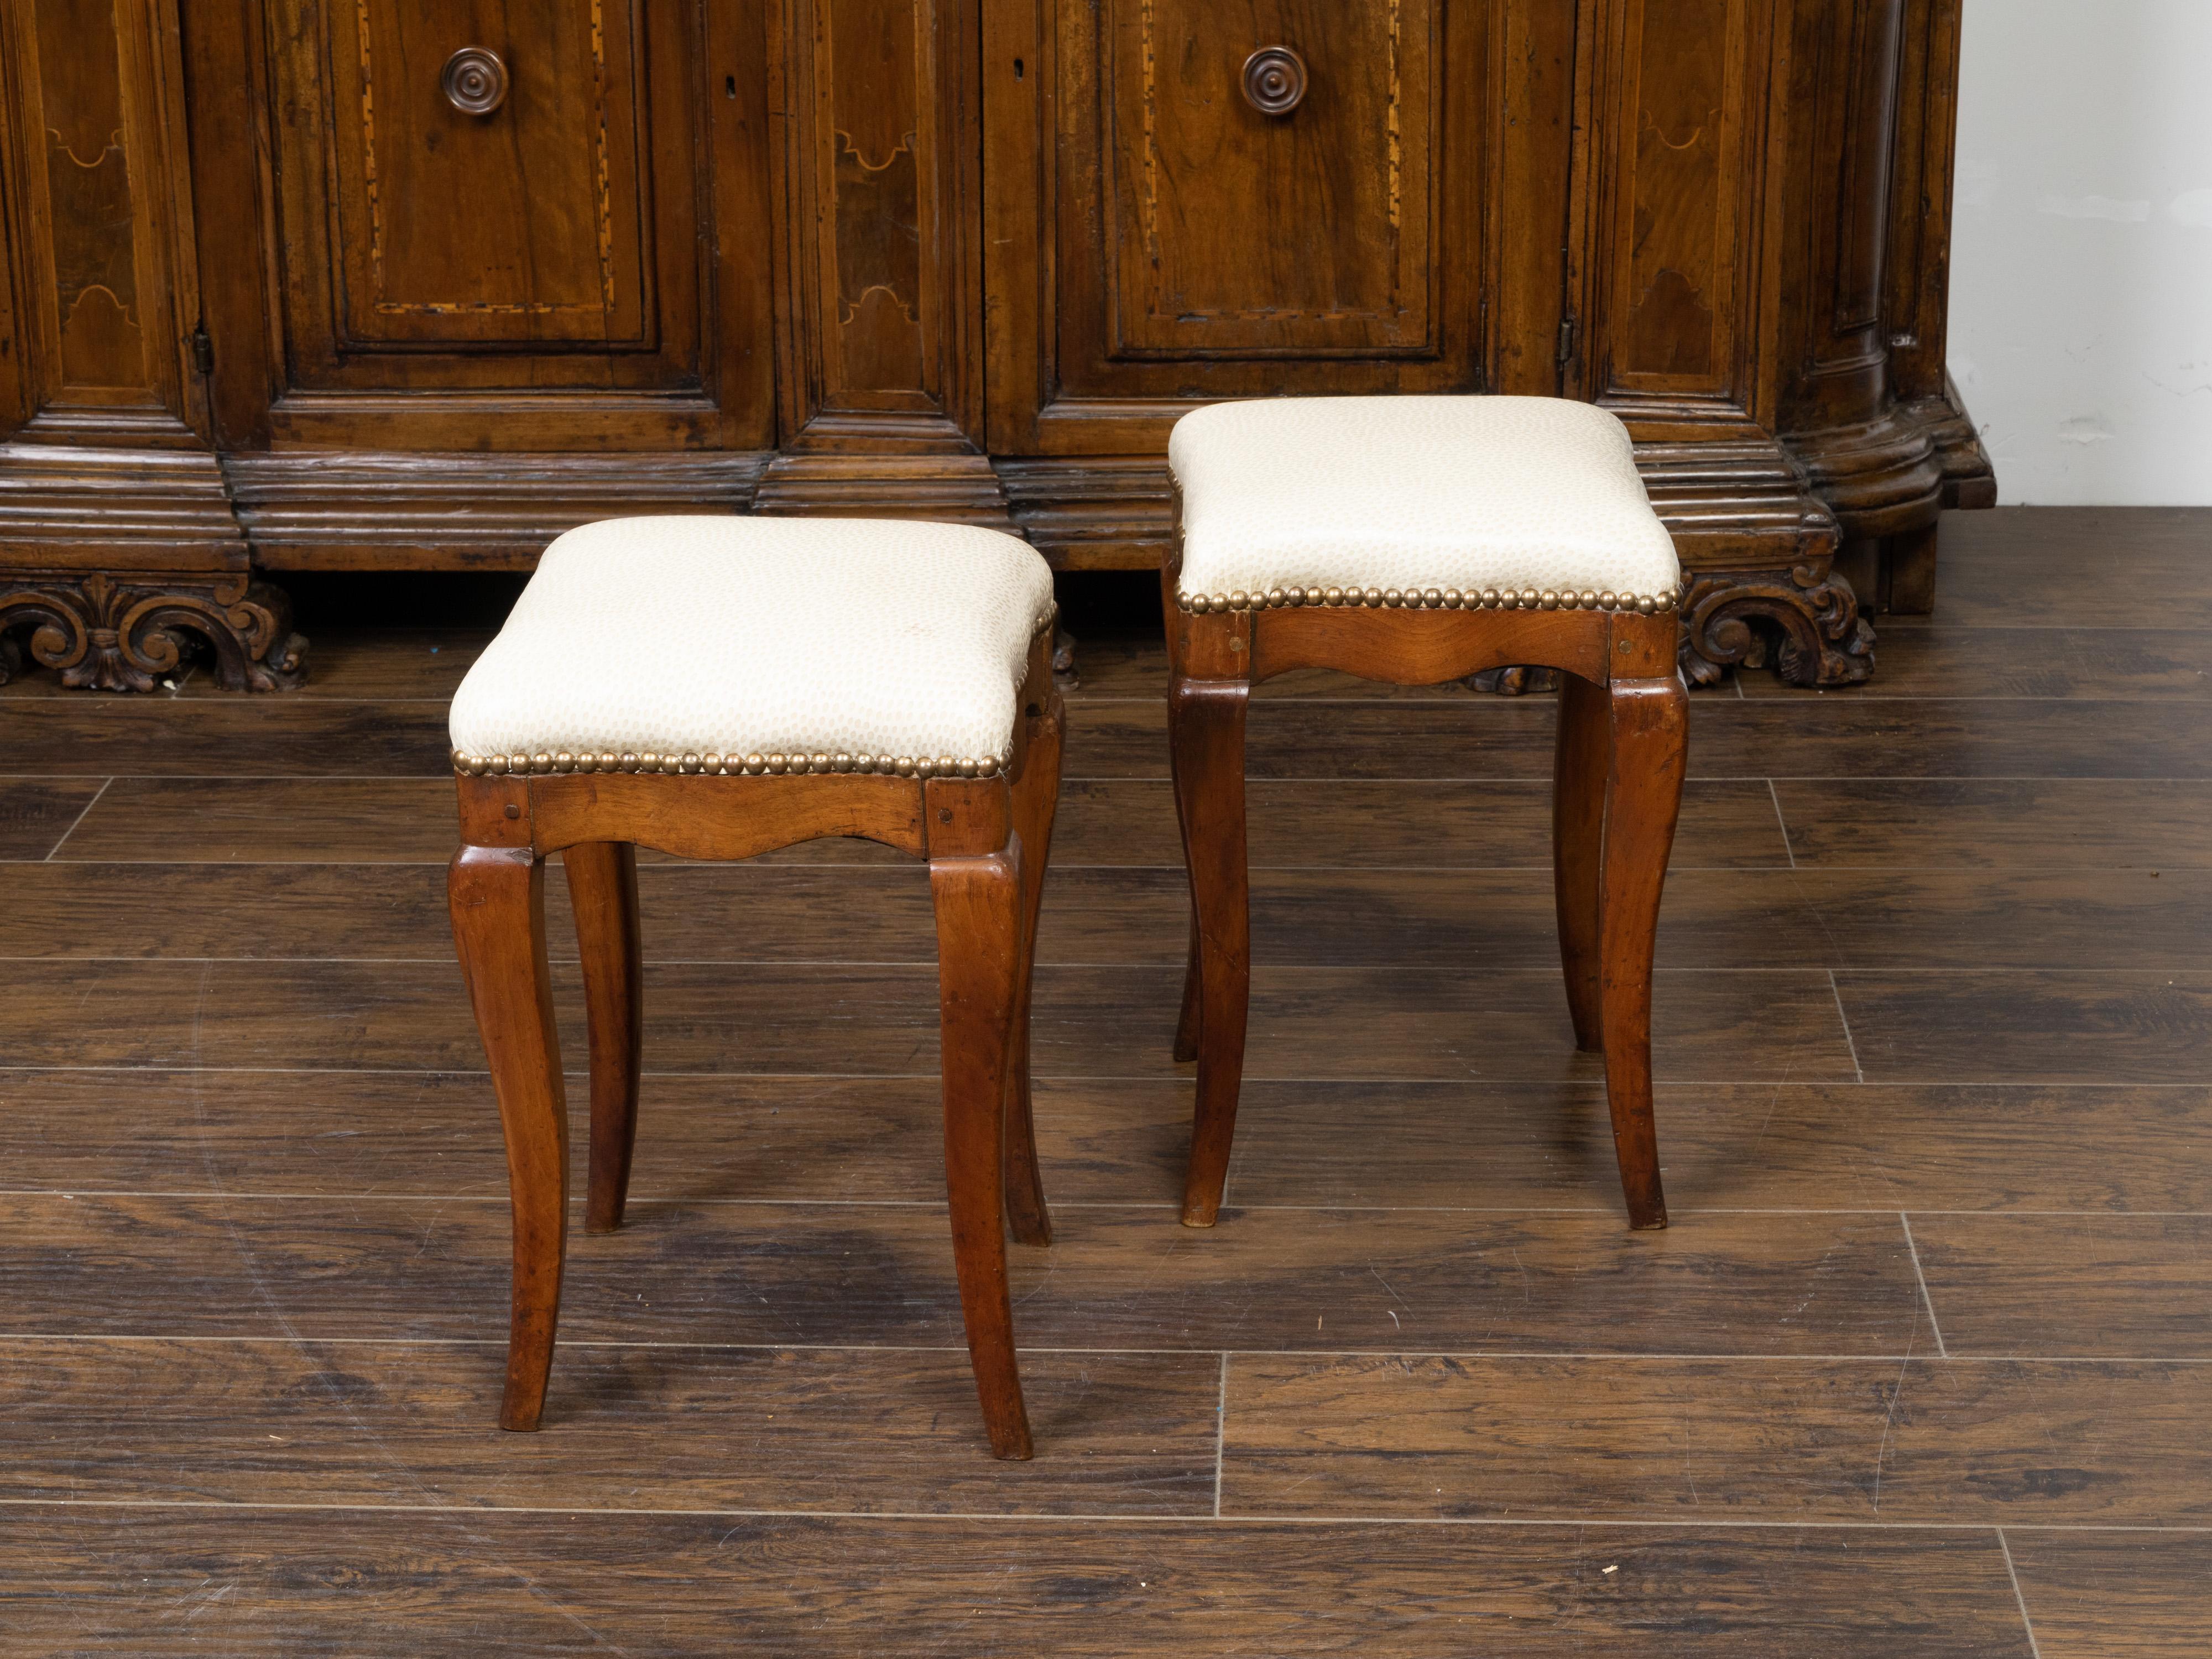 Pair of 19th Century Italian Walnut Stools with Cabriole Legs and New Upholstery In Good Condition For Sale In Atlanta, GA